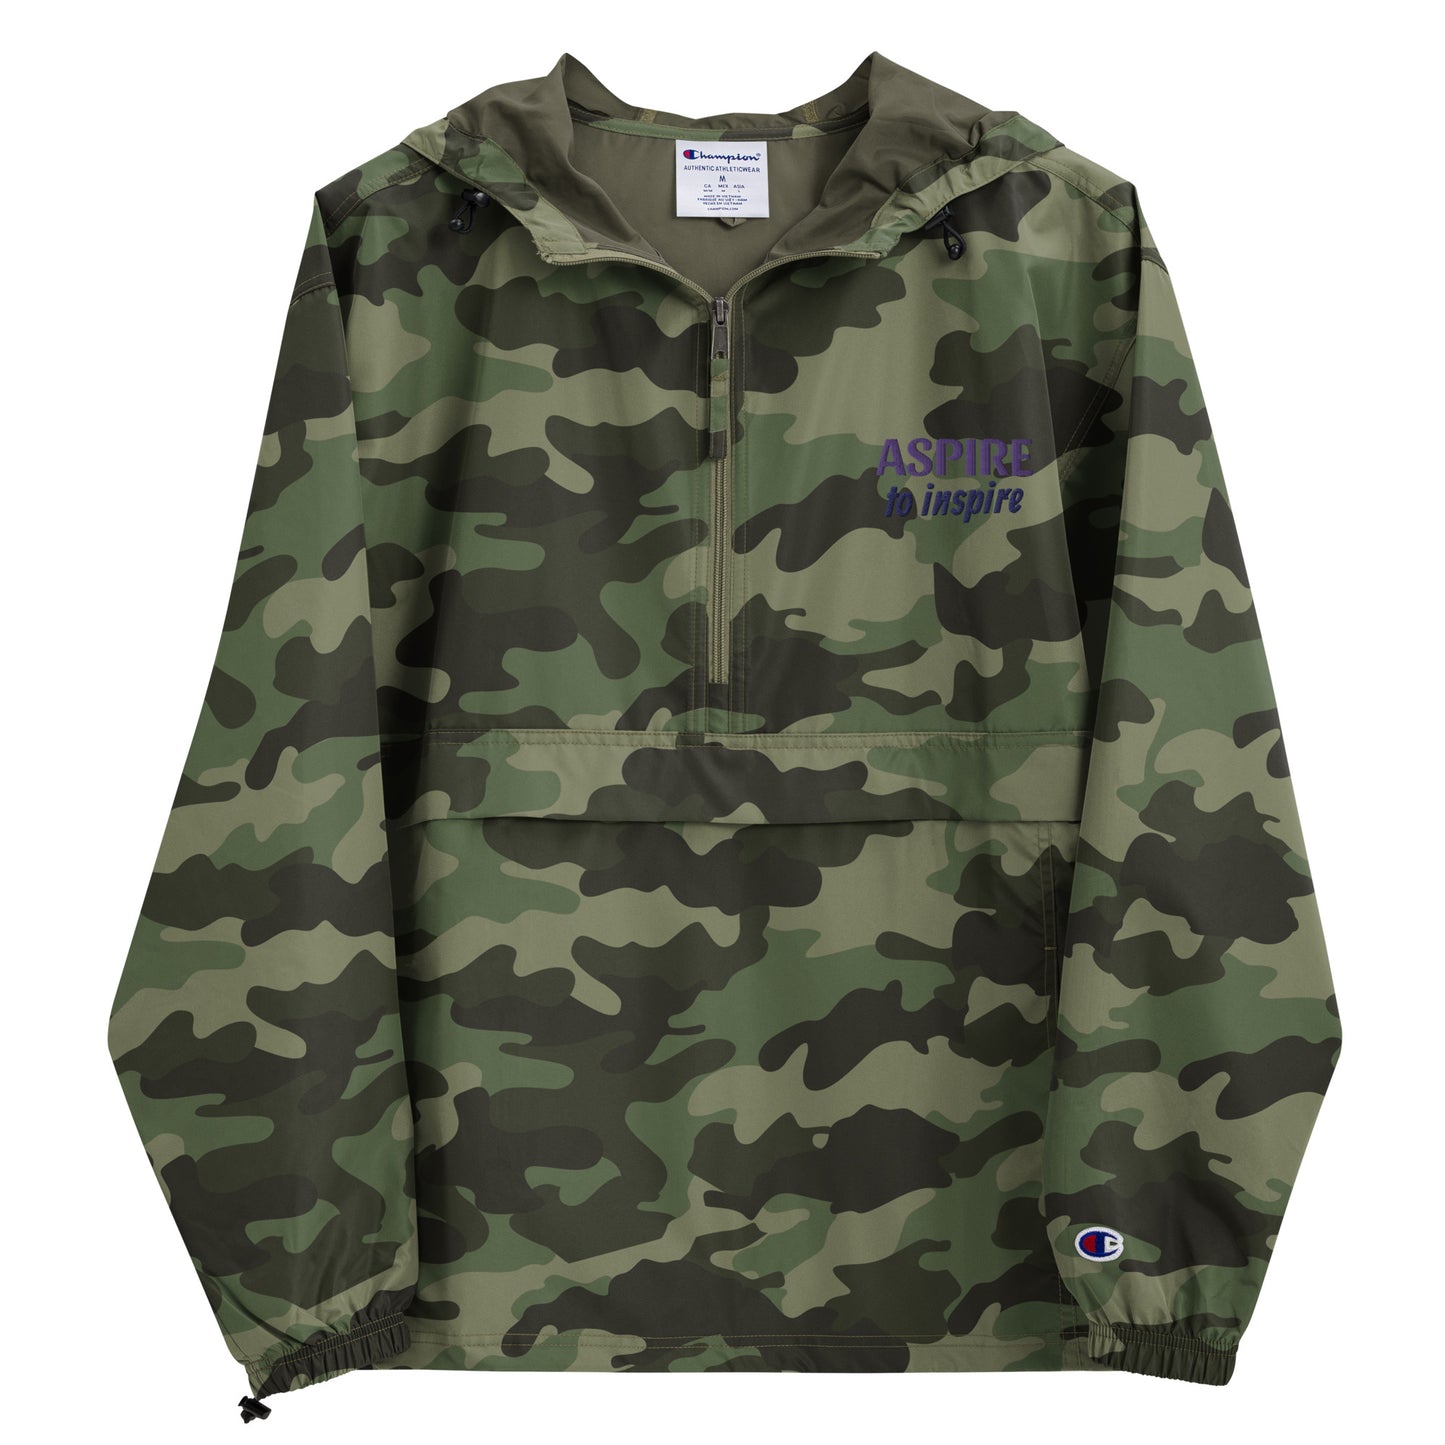 Embroidered Champion Packable Jacket "Aspire To Inspire"